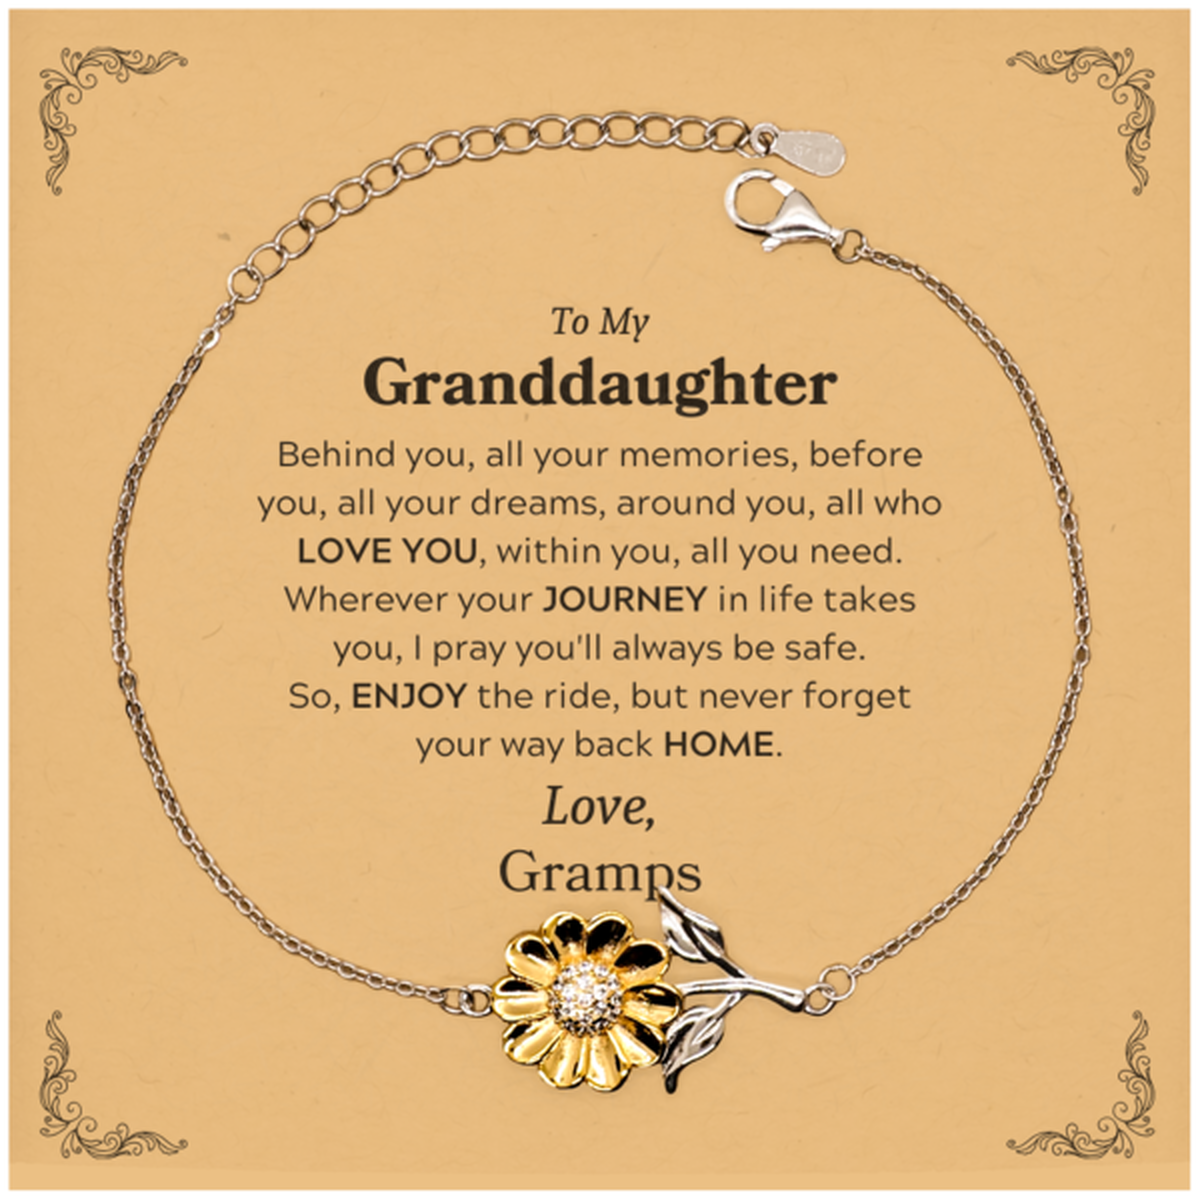 To My Granddaughter Graduation Gifts from Gramps, Granddaughter Sunflower Bracelet Christmas Birthday Gifts for Granddaughter Behind you, all your memories, before you, all your dreams. Love, Gramps